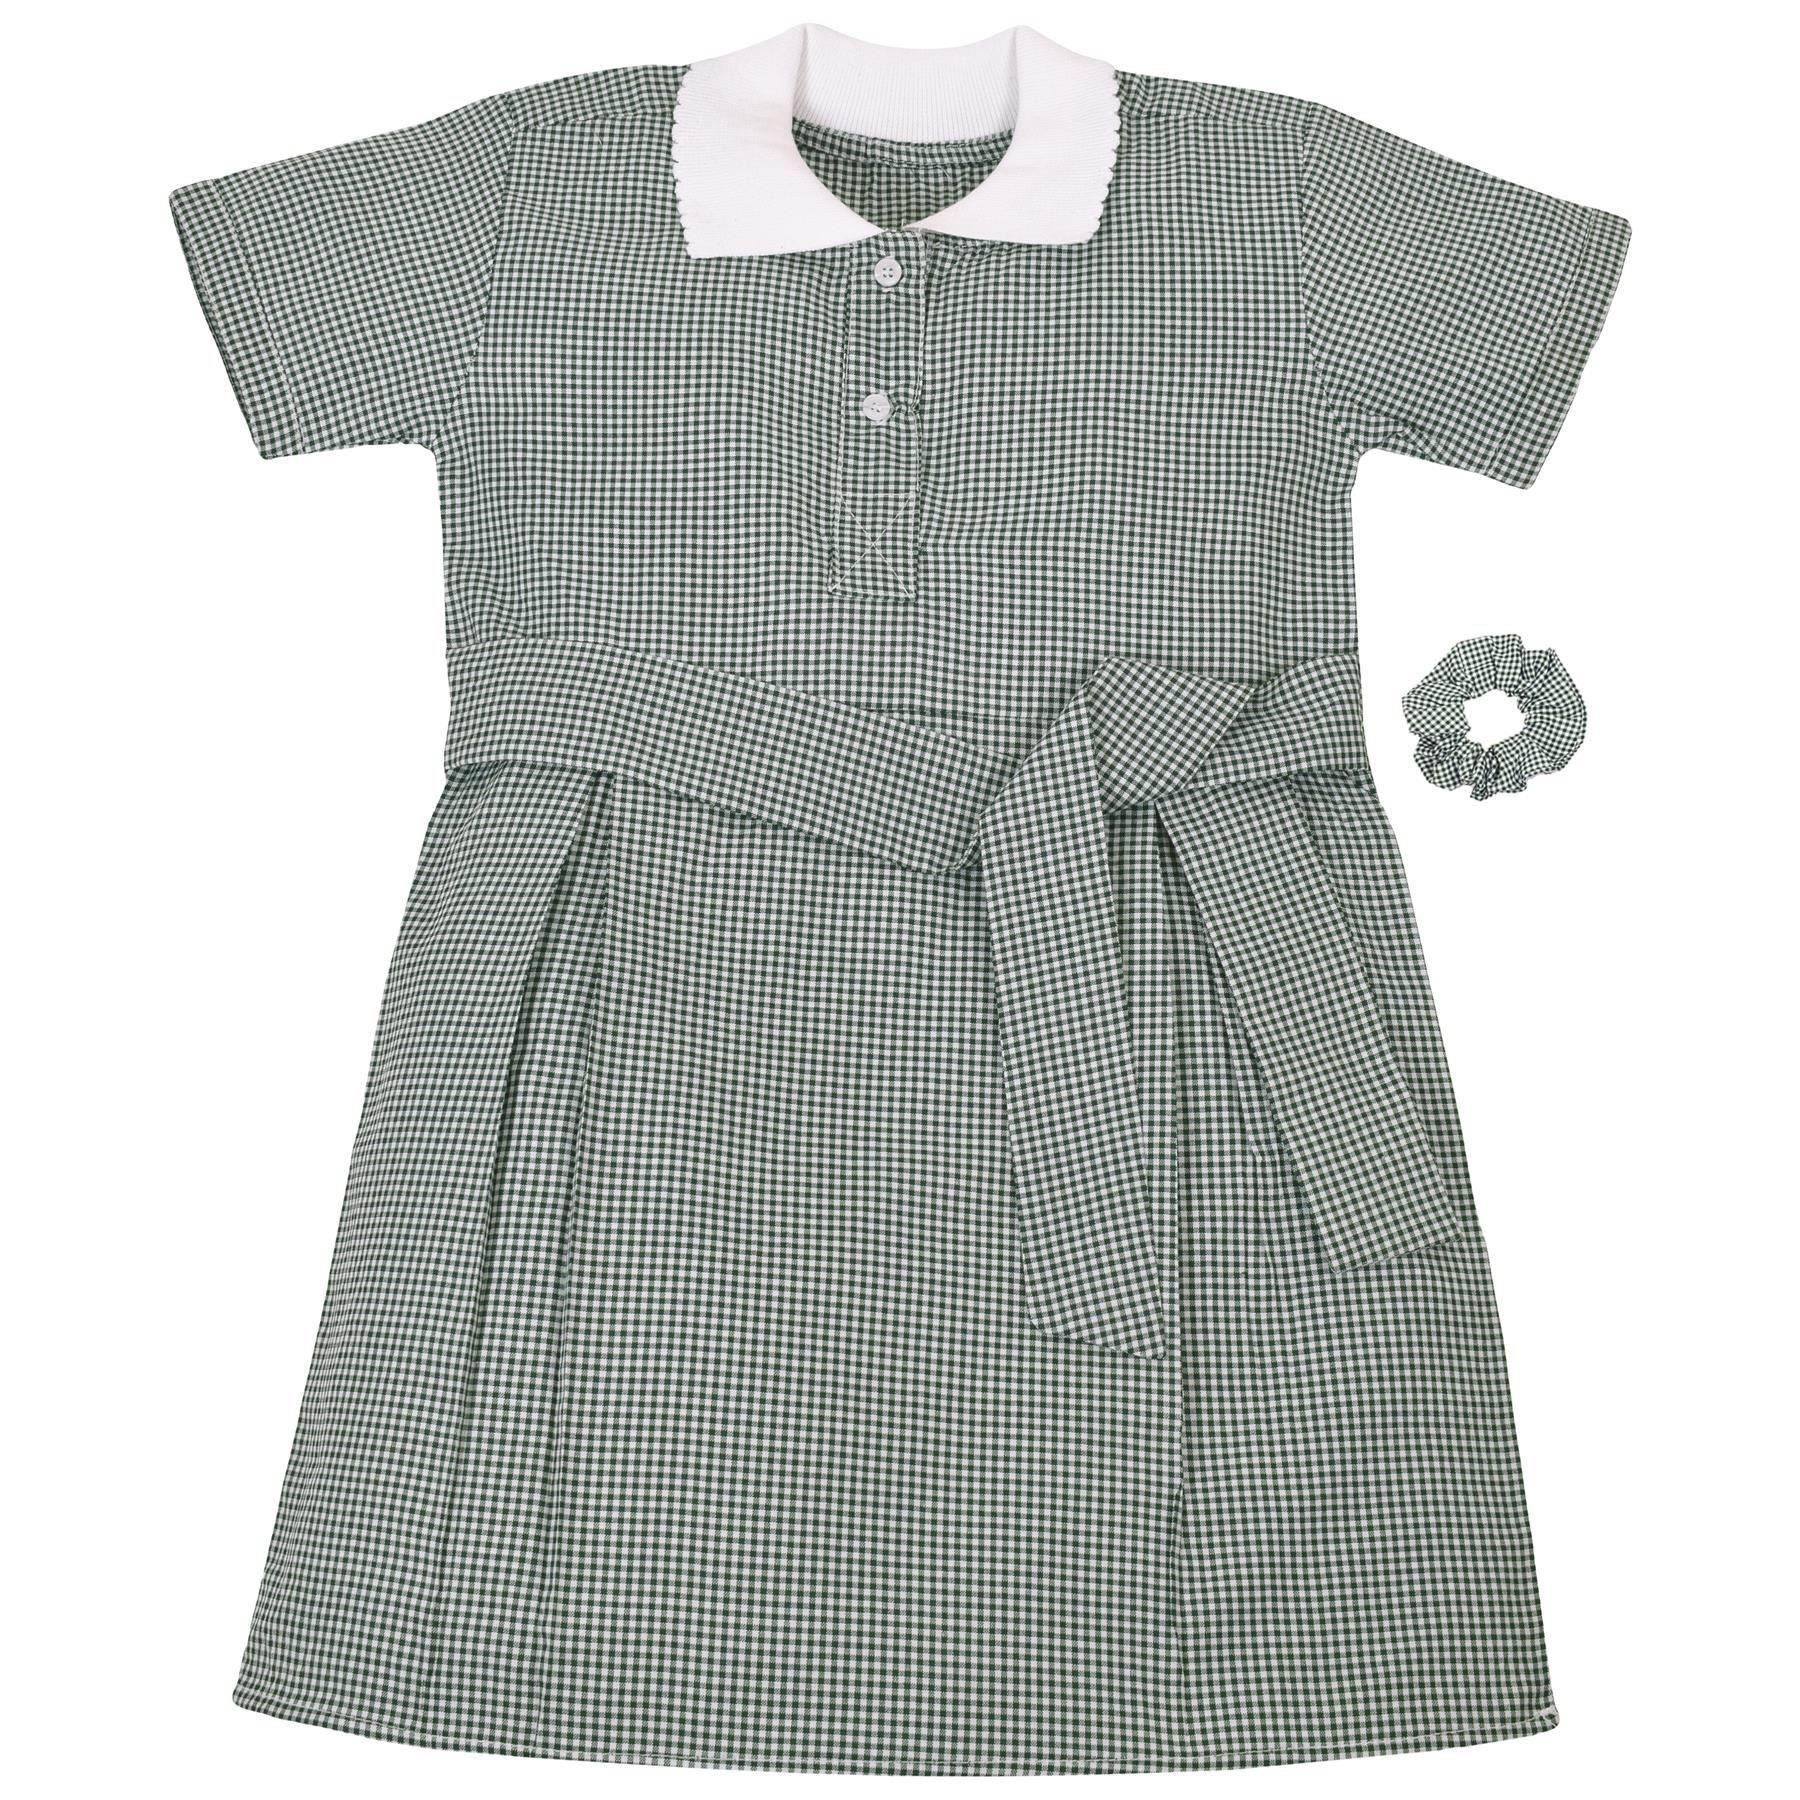 Kids Girls Gingham School Dress Check Belted Dresses With Matching Scrunchies